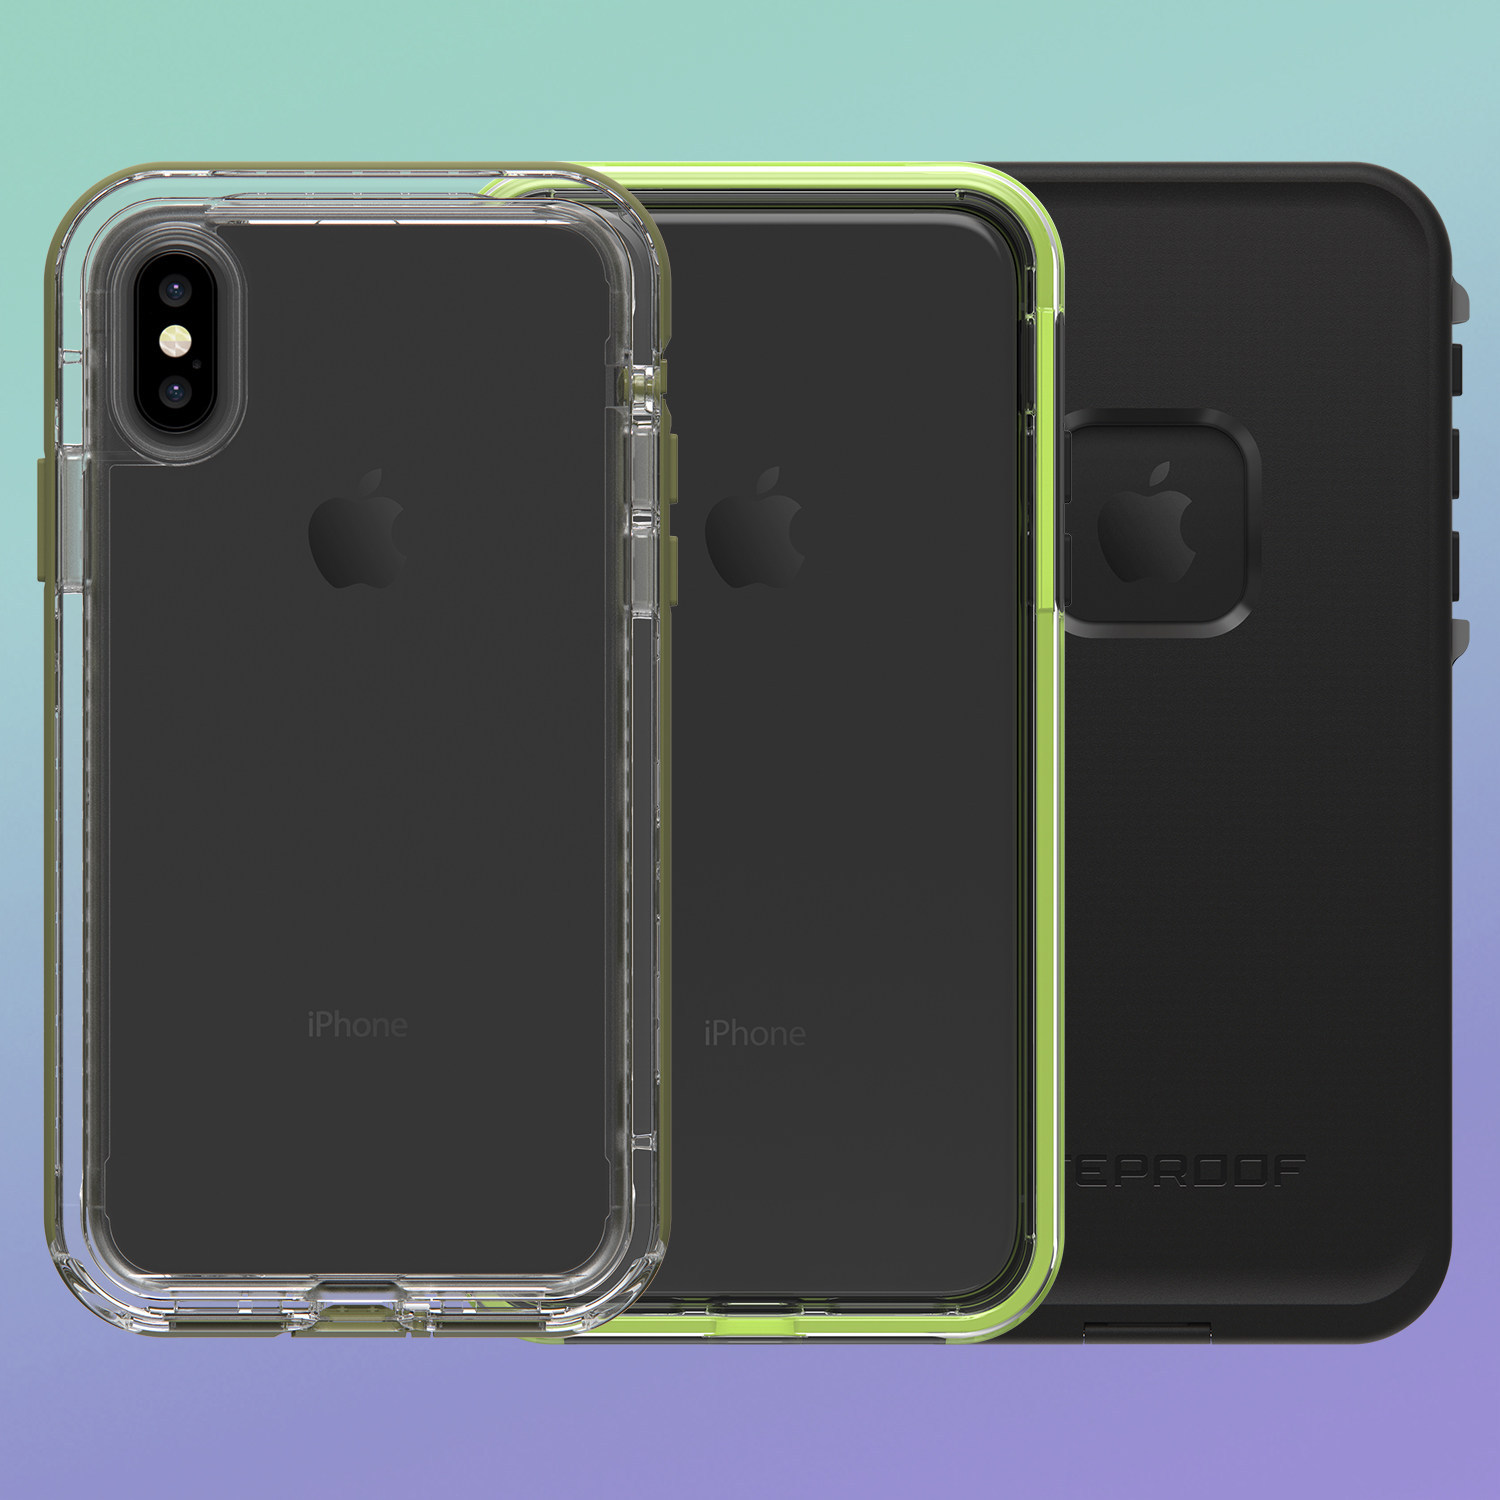 LifeProof Announces SLɅM, NËXT and FRĒ for iPhone Xs, iPhone Xs Max and iPhone XR